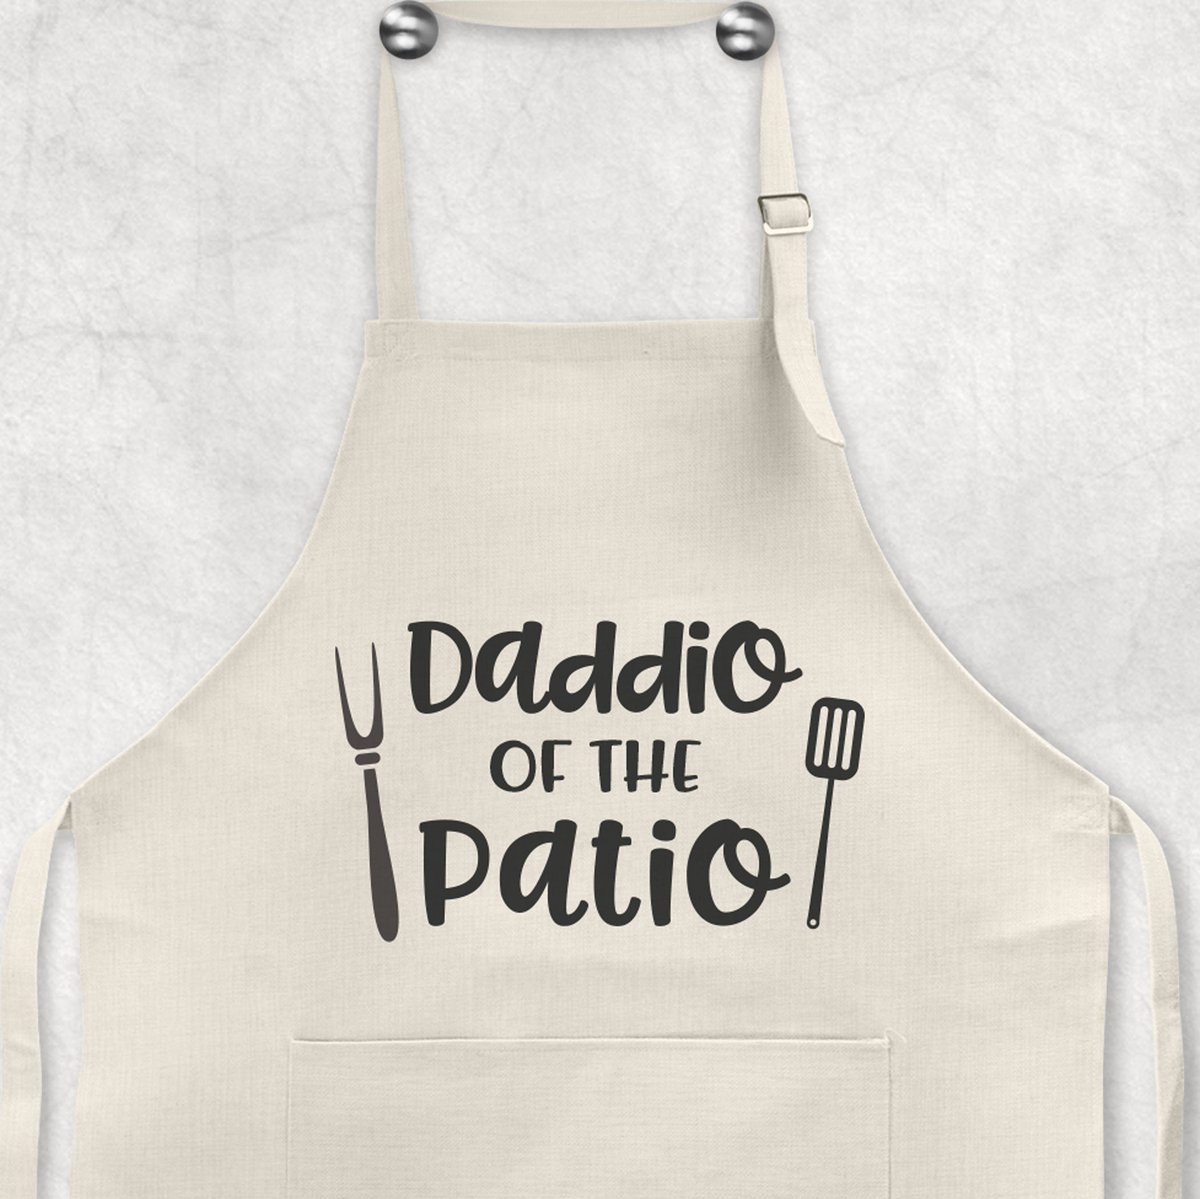 If your daddio loves to grill he will love our new grilling apron! #FunnyApron #BBQApron, GiftForDad #Barbequing #MeatSmoking #GrillingApron To see more of our funny aprons visit our store at etsy.com/shop/naturesbe…